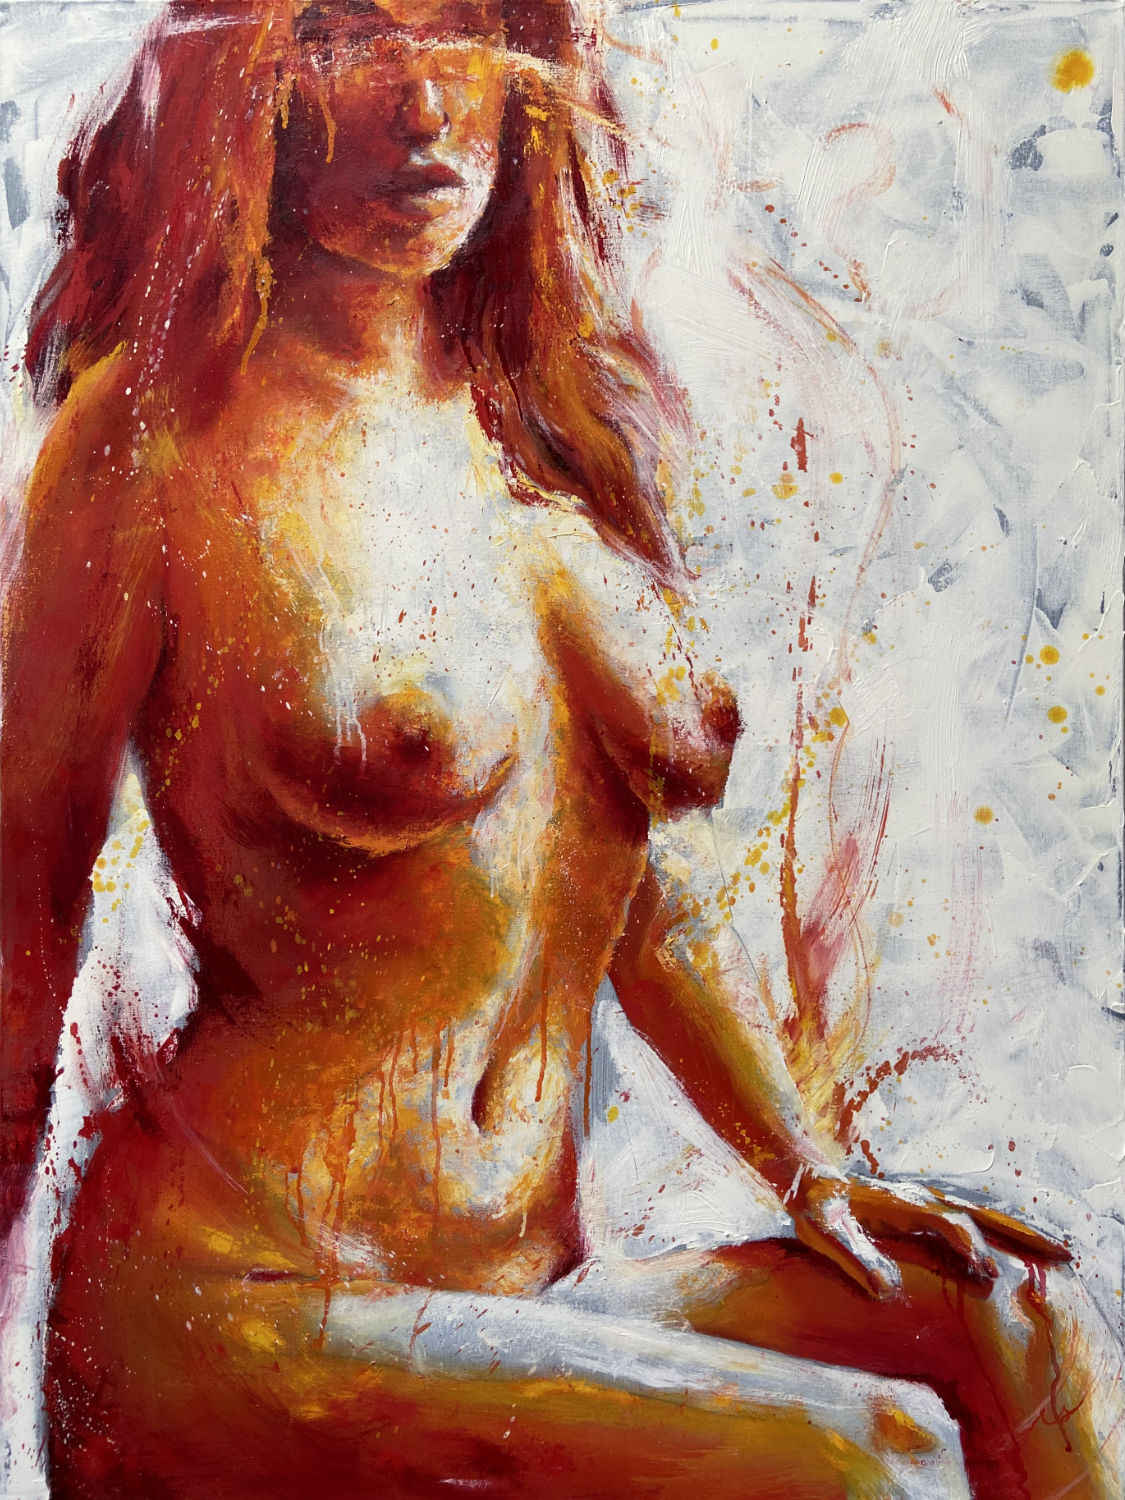 original oil painting and mixed media by cassidy austin studios. orange pop-art textured nude woman in power stance. Titled: I Am Ascendant